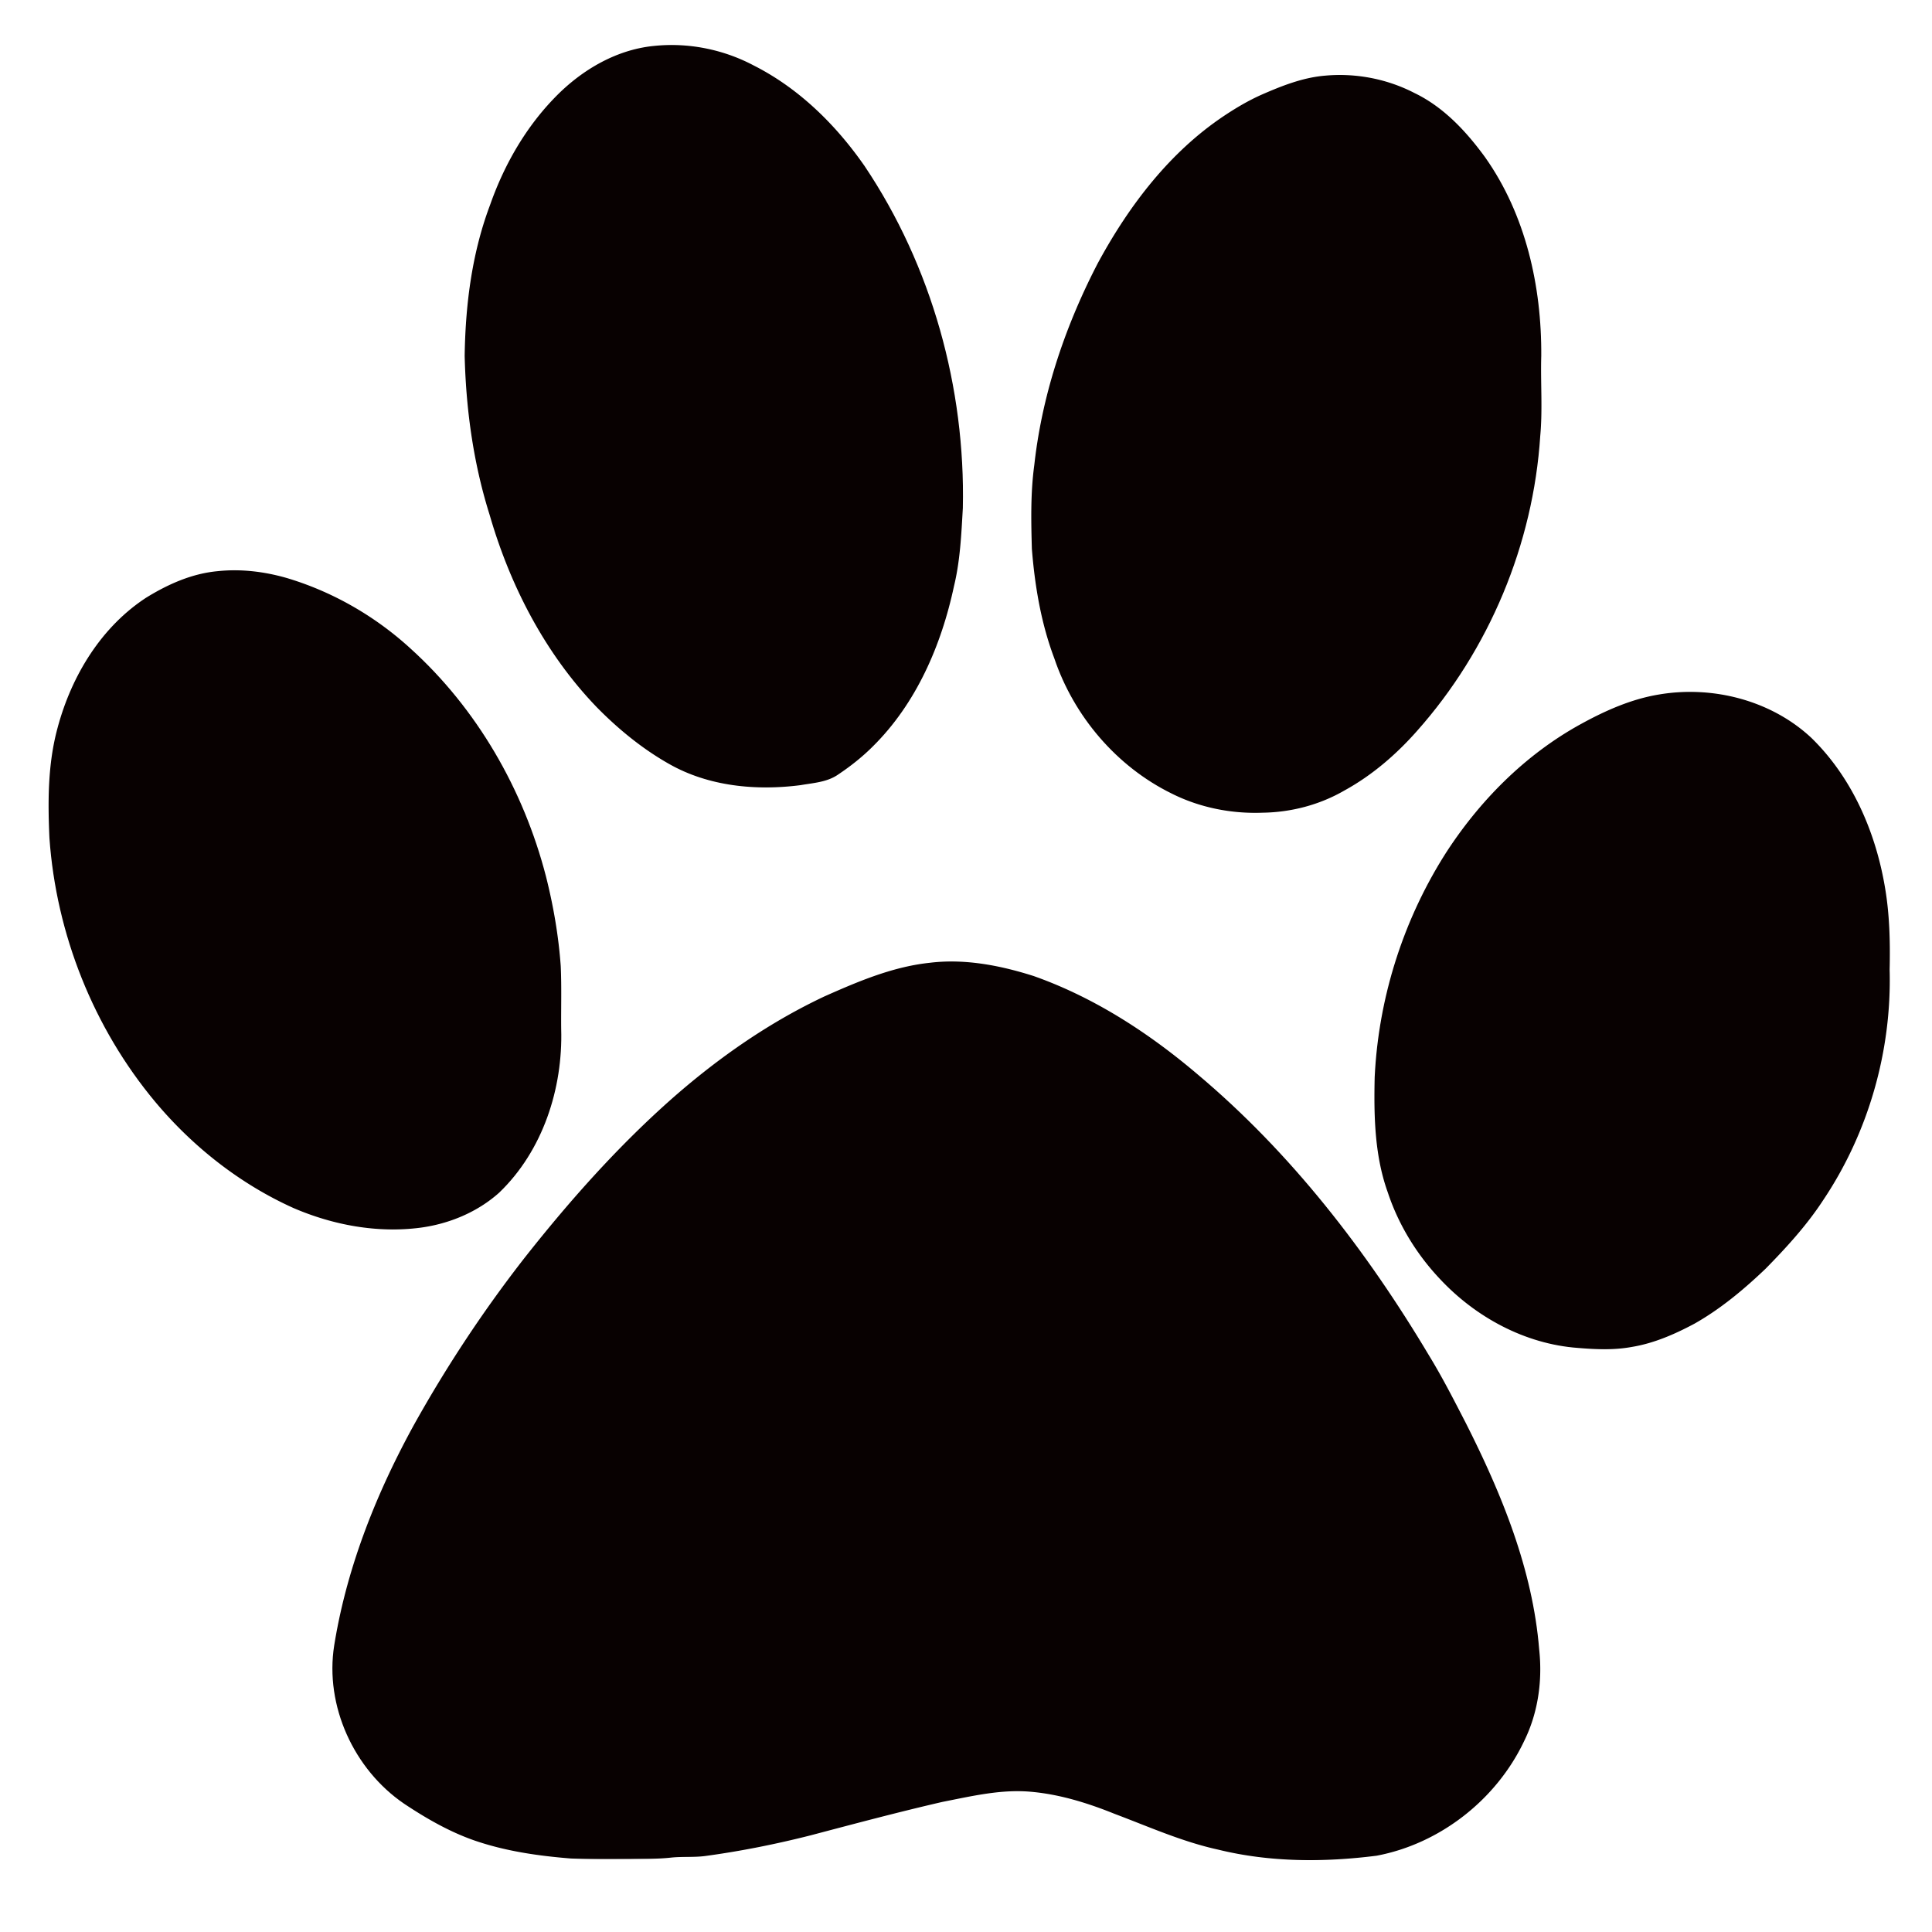 Paw Download Free PNG Clip Art